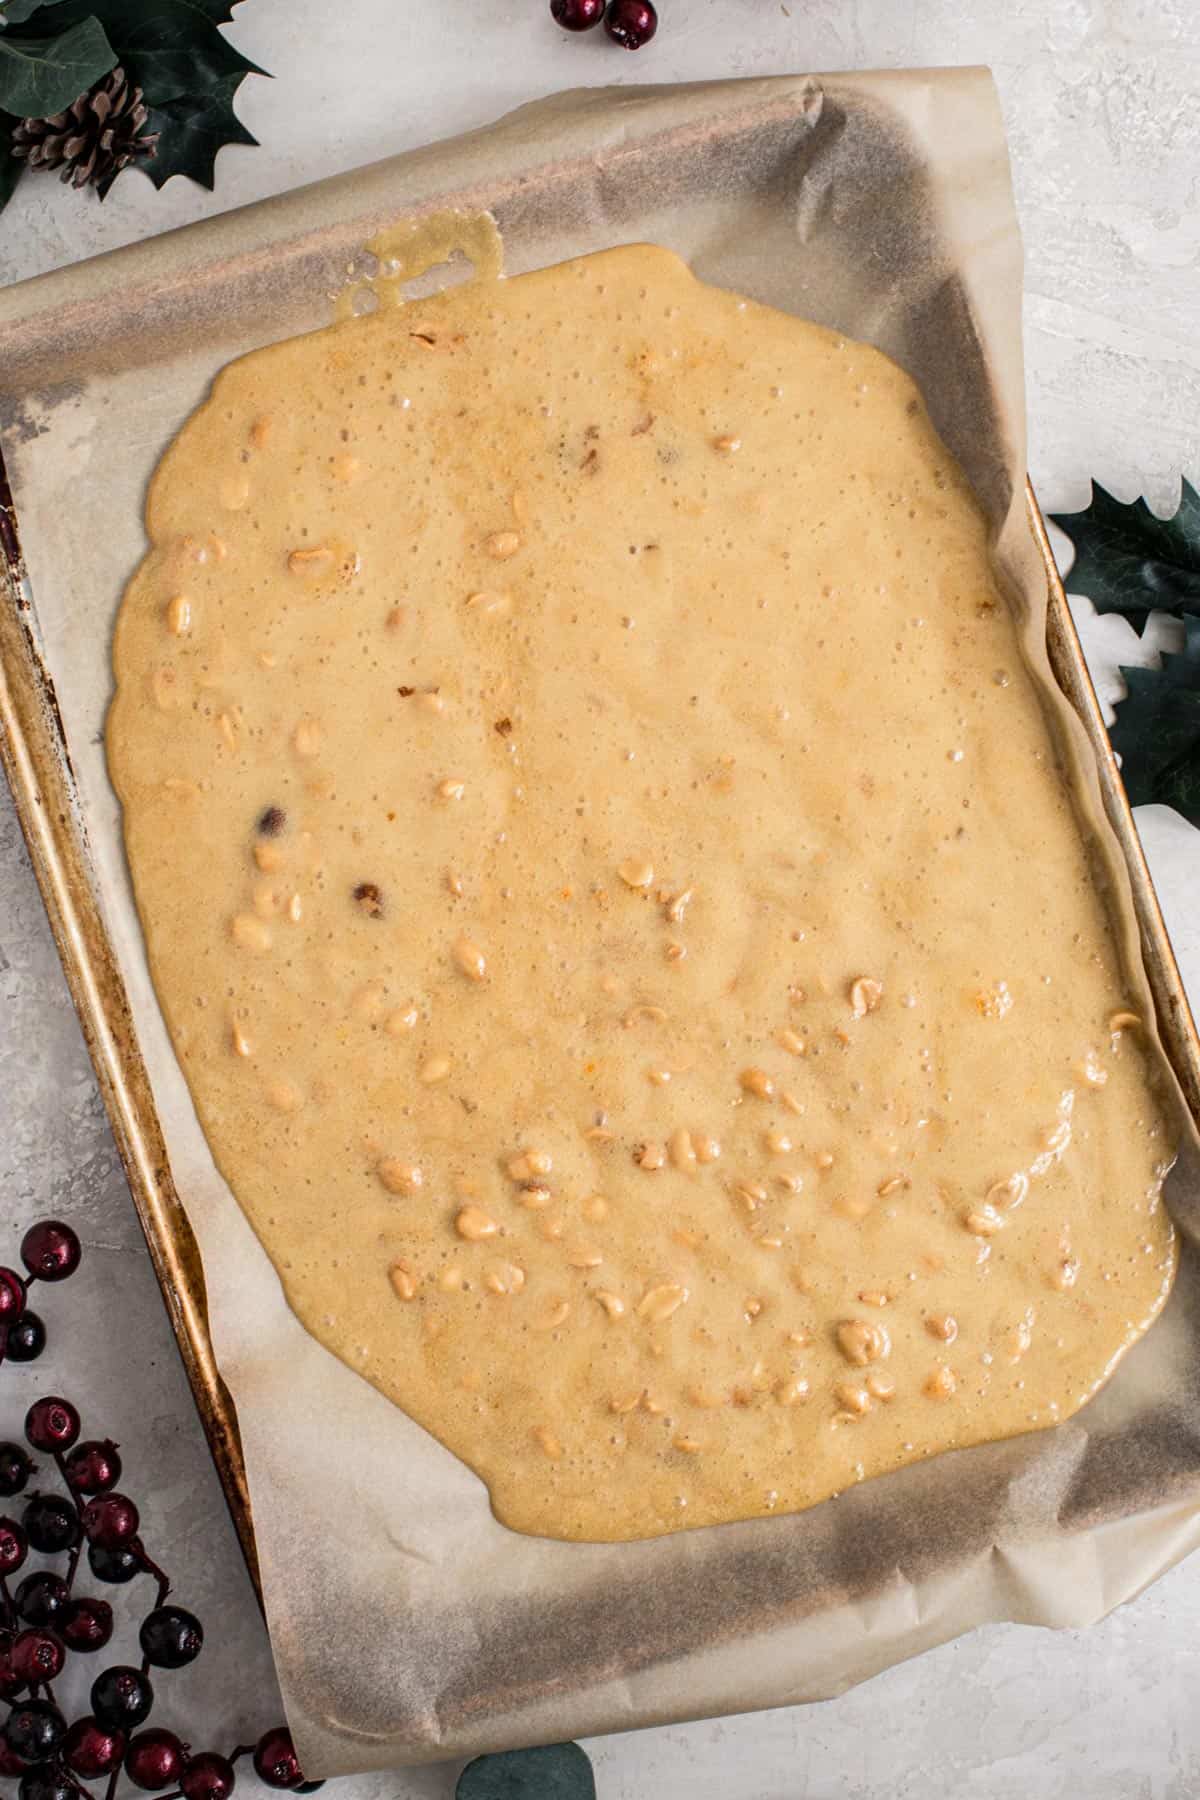 Peanut brittle spread onto a parchment-lined baking sheet.